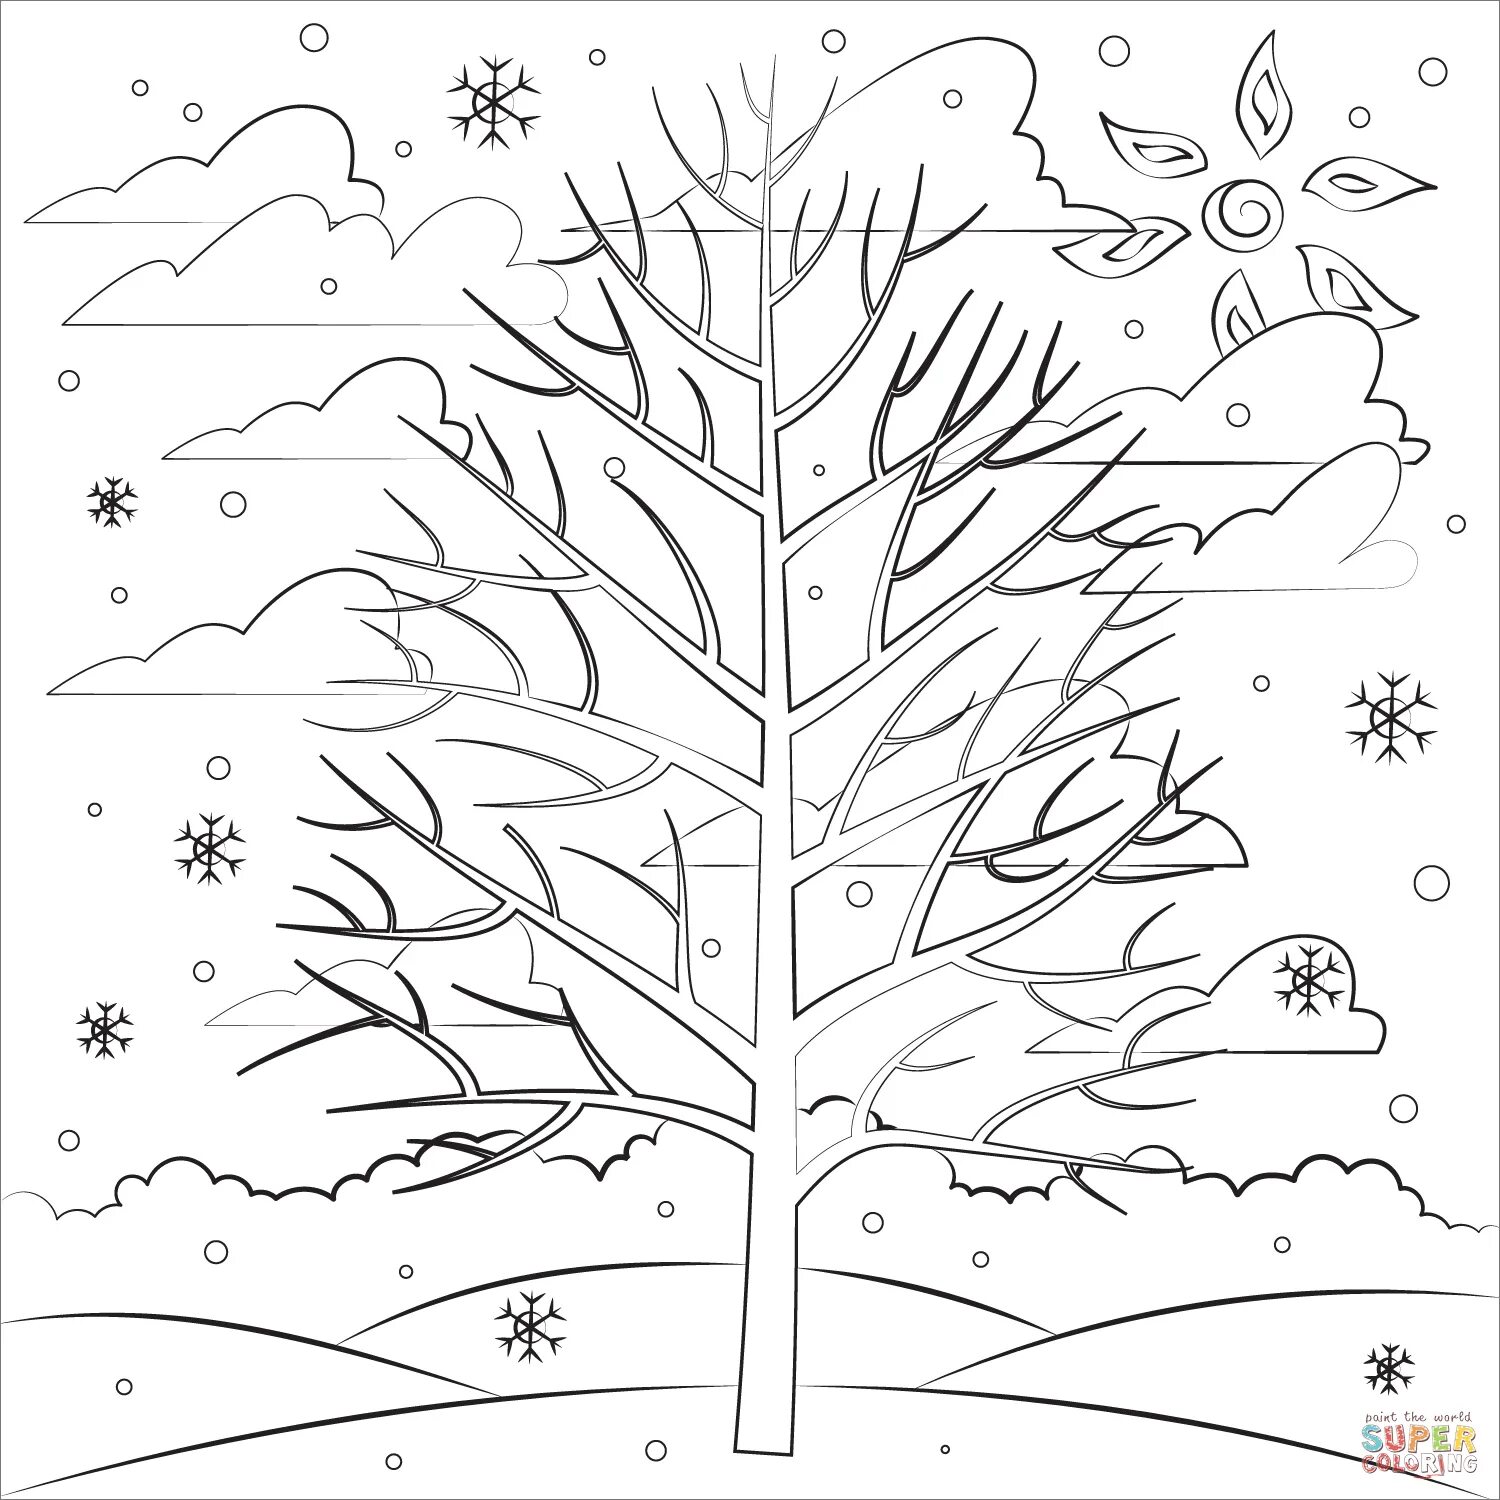 Coloring book funny winter tree for children 3-4 years old